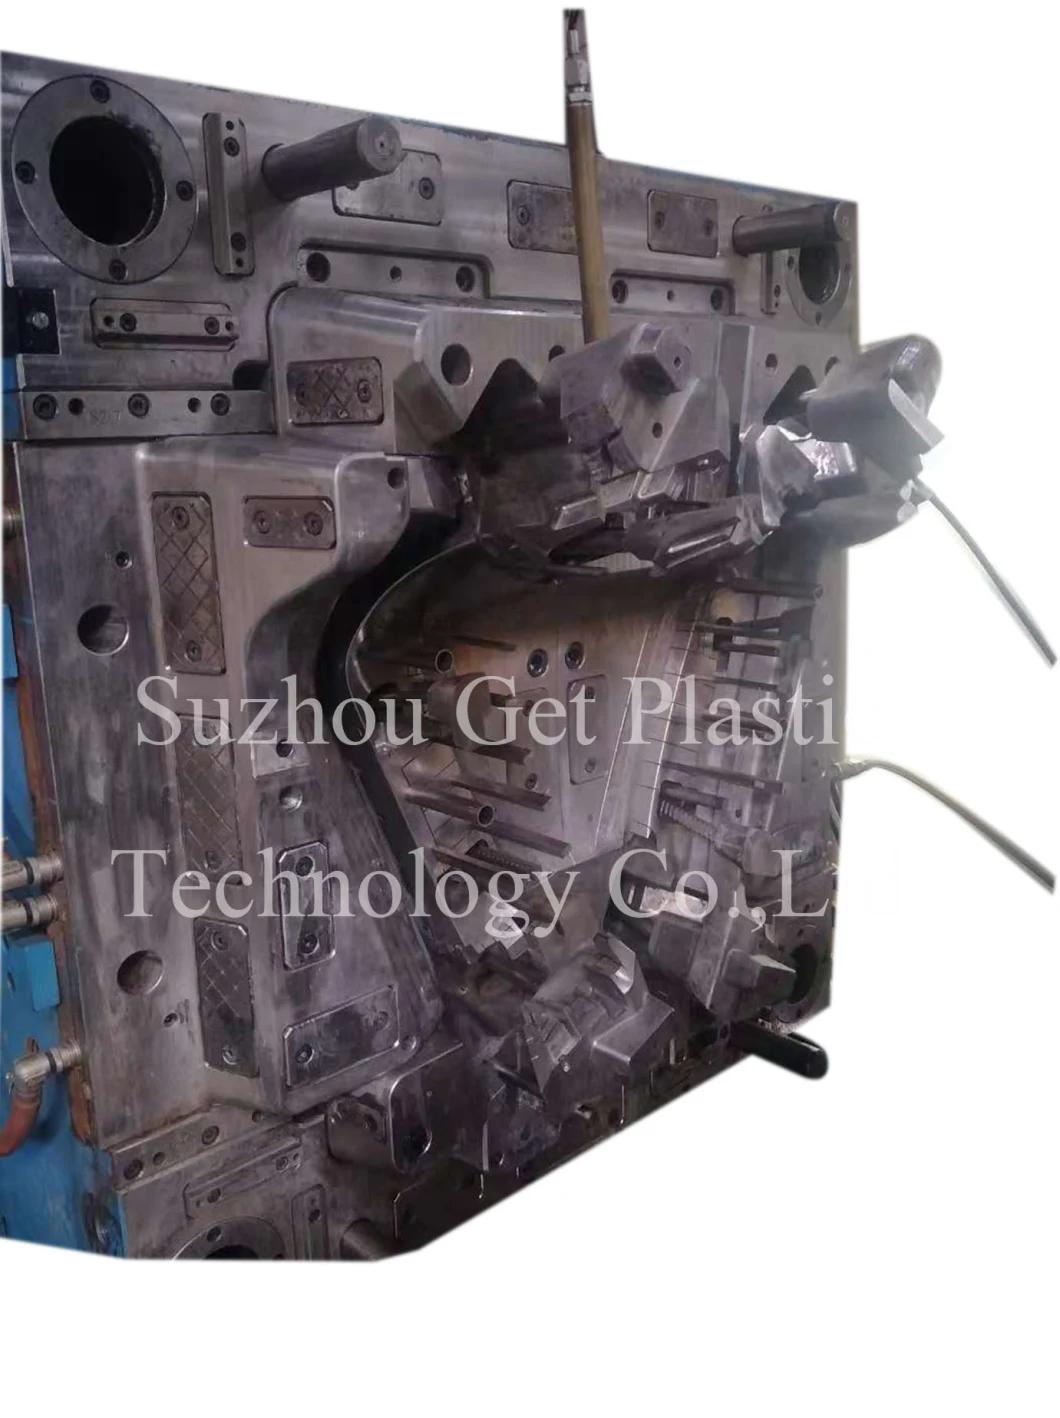 Advanced Plastic Injection Products